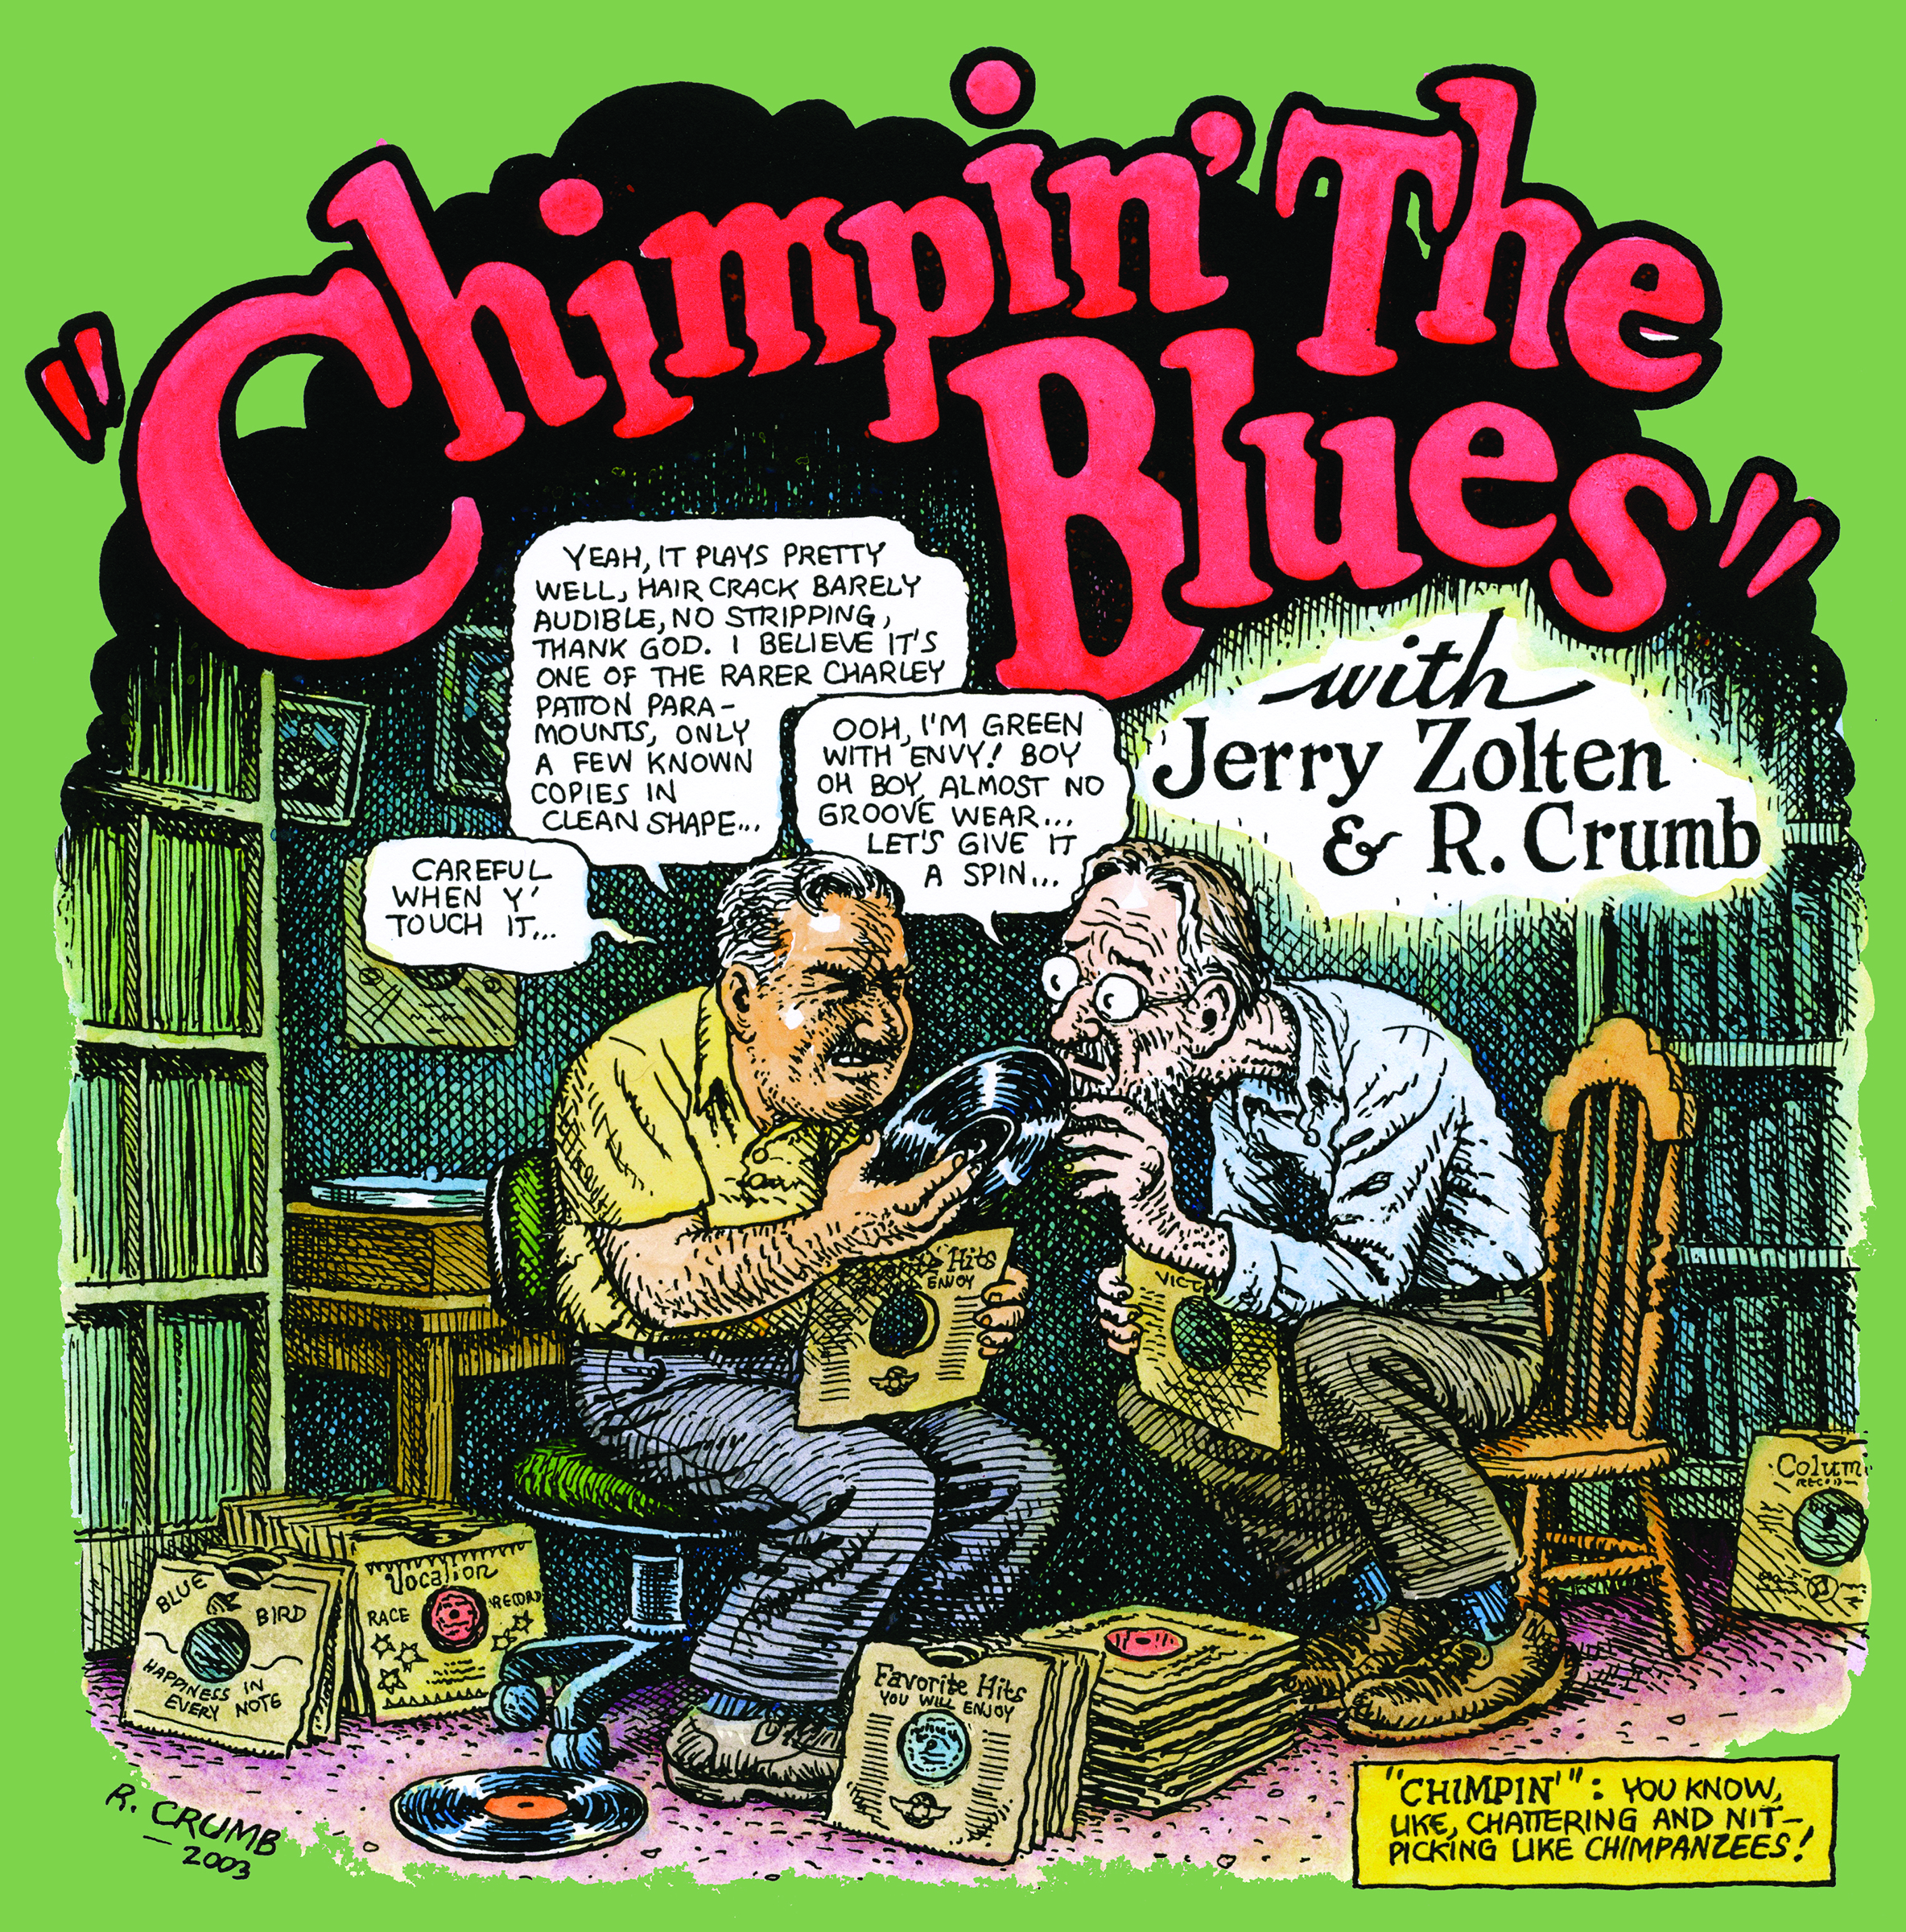 2013 release of old 78 records with Robert Crumb & Jerry Zolten